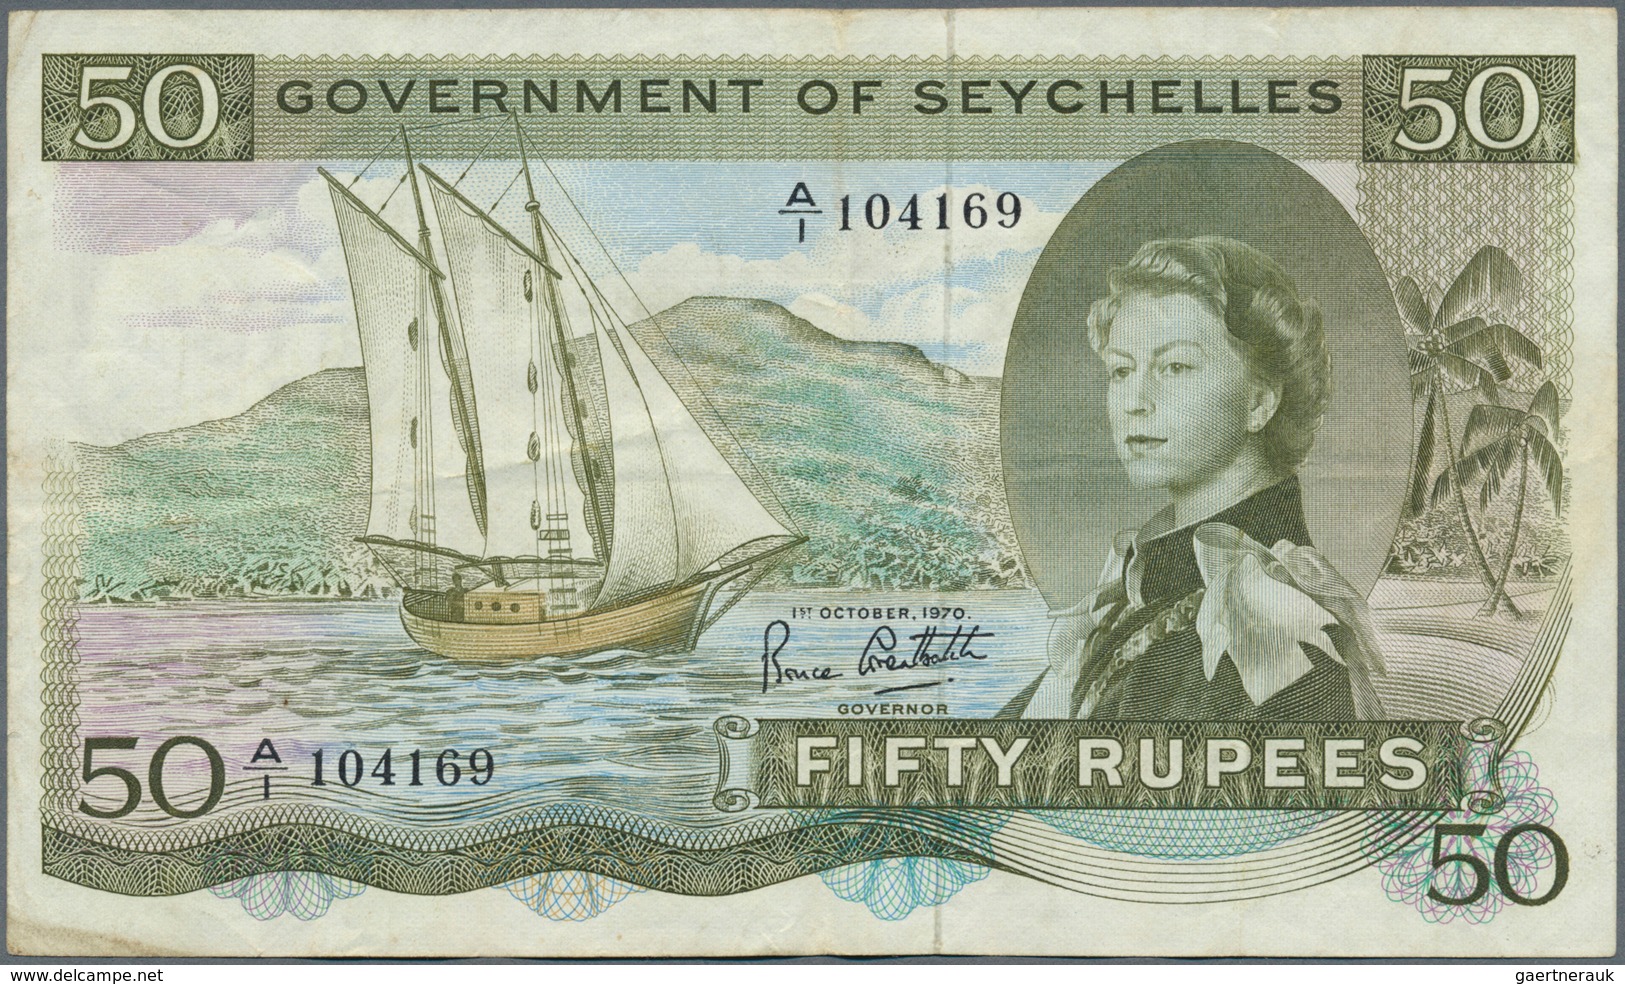 02356 Seychelles / Seychellen: Very Nice Lot With 6 Notes Of The 50 Rupees SEX Note, Comprising Two Pieces - Seychelles